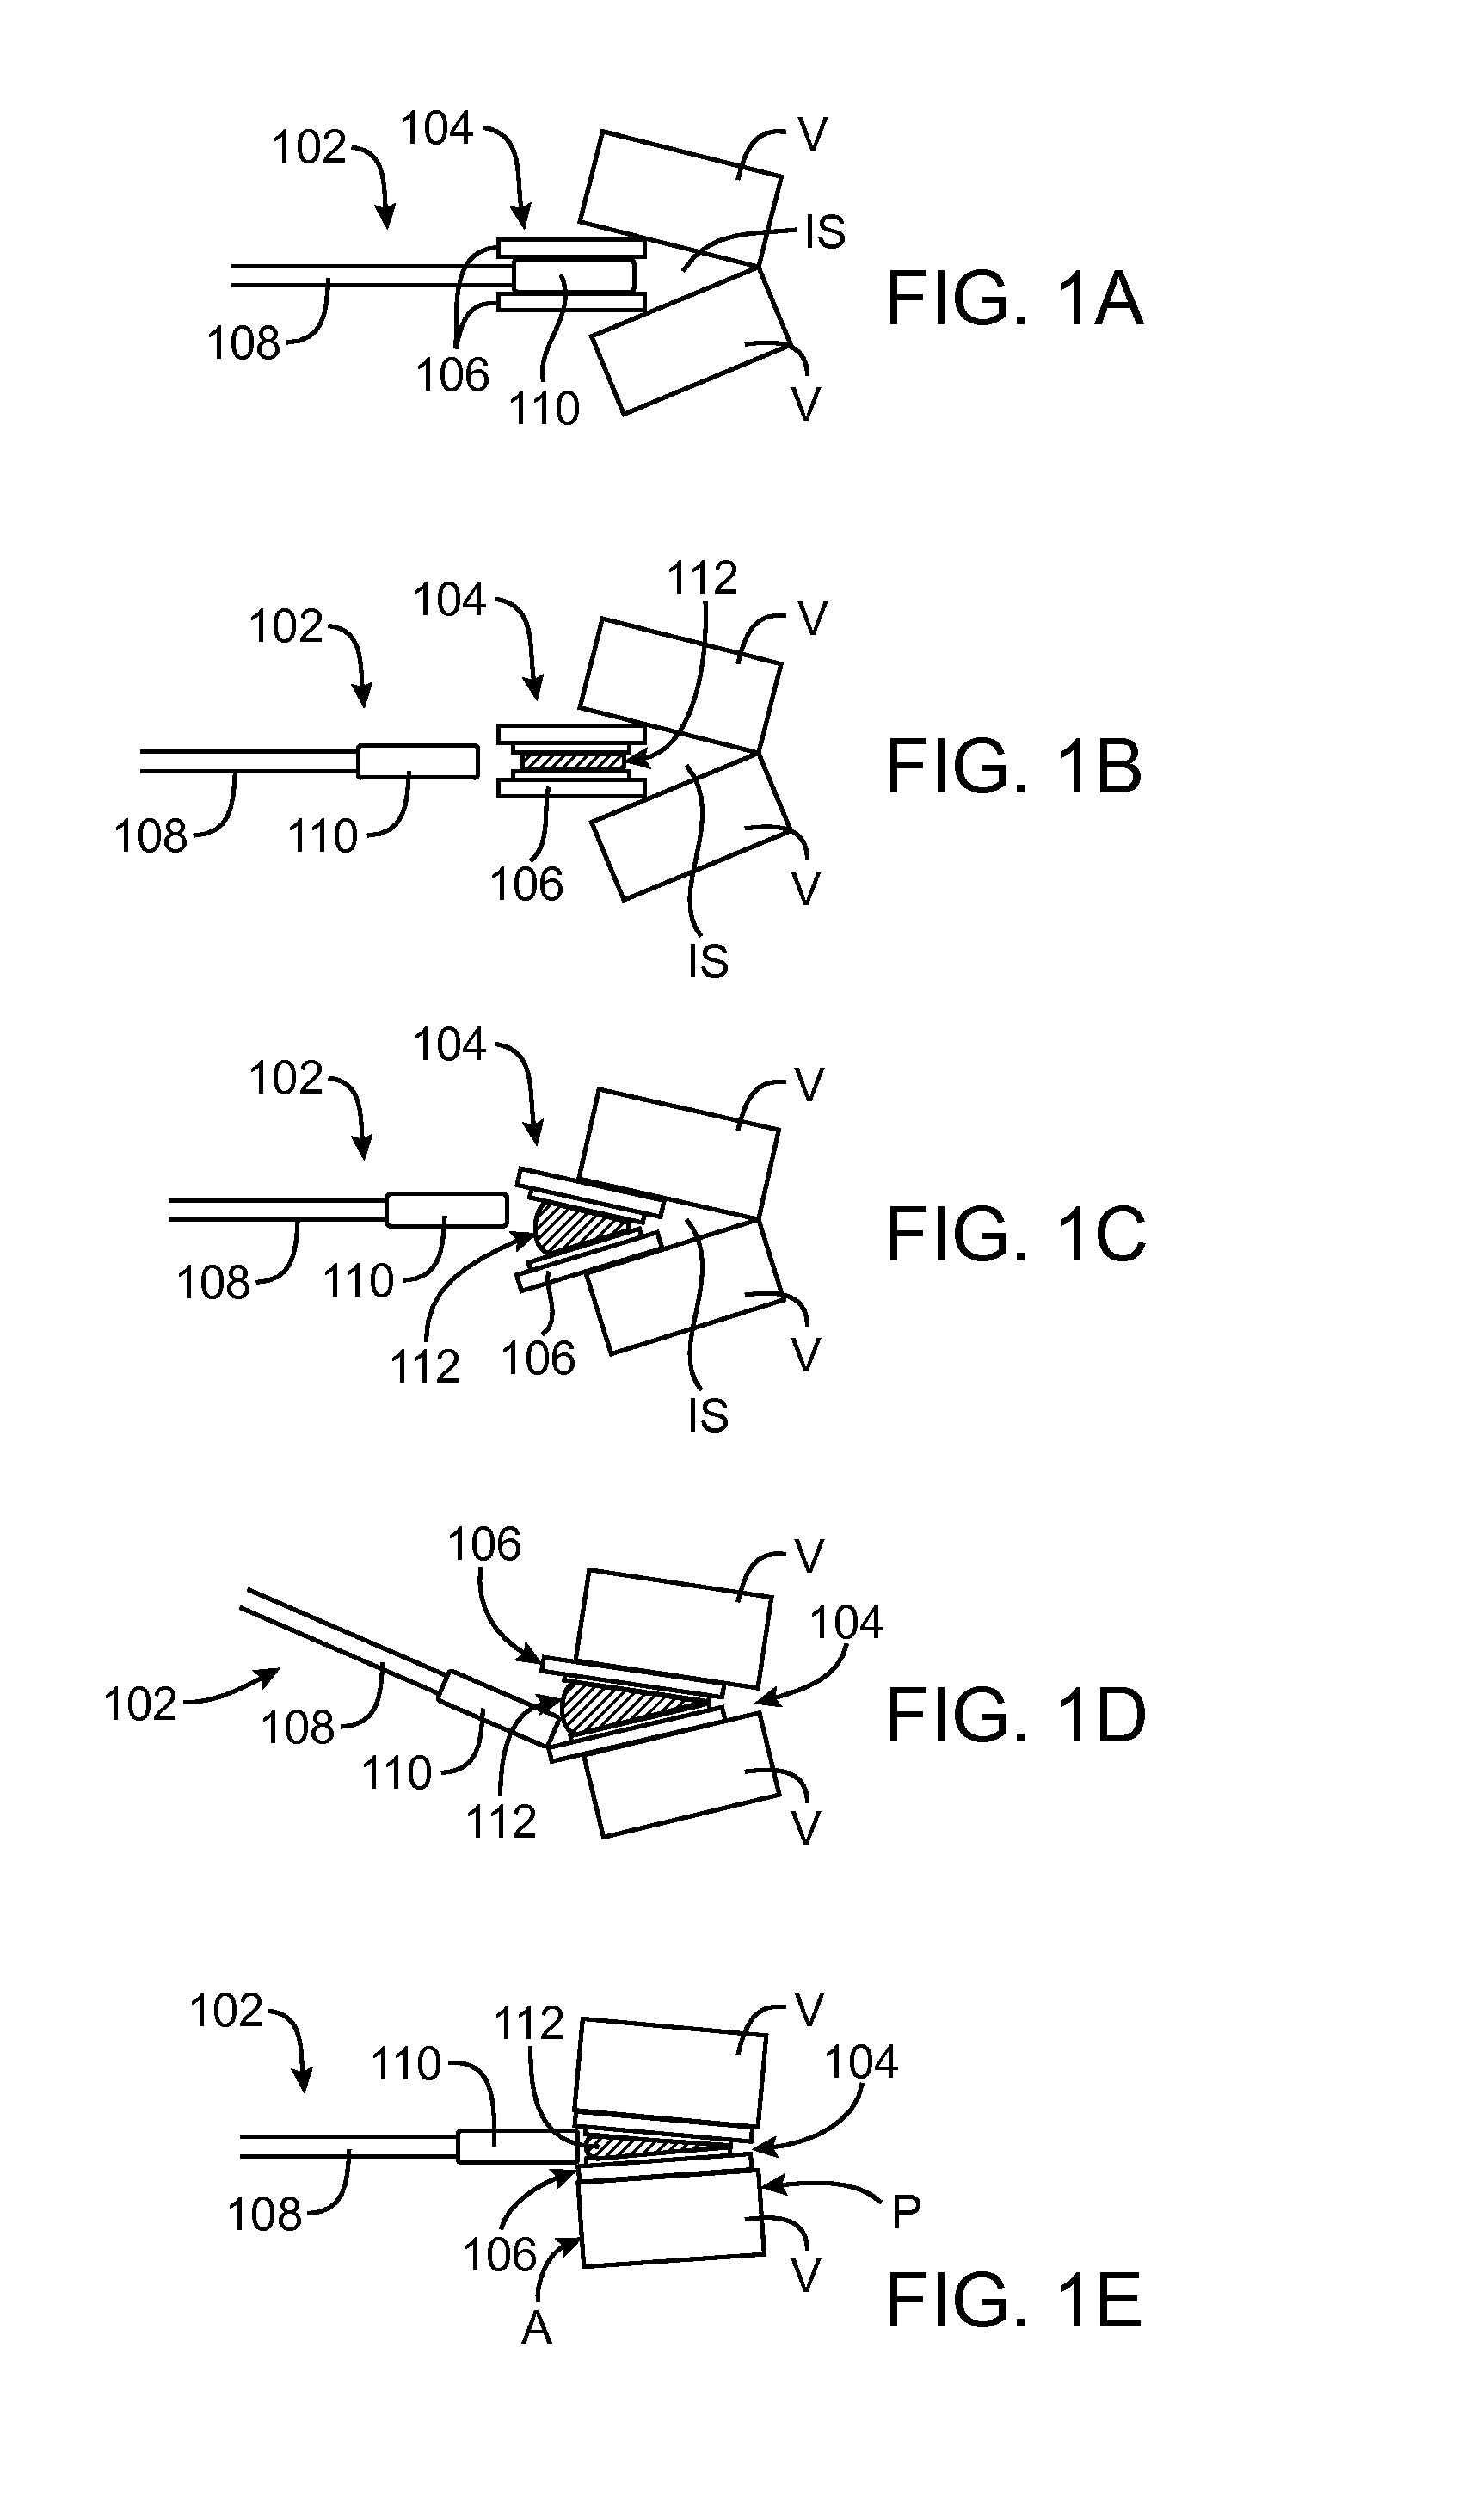 Methods and Apparatus for Intervertebral Disc Prosthesis Insertion